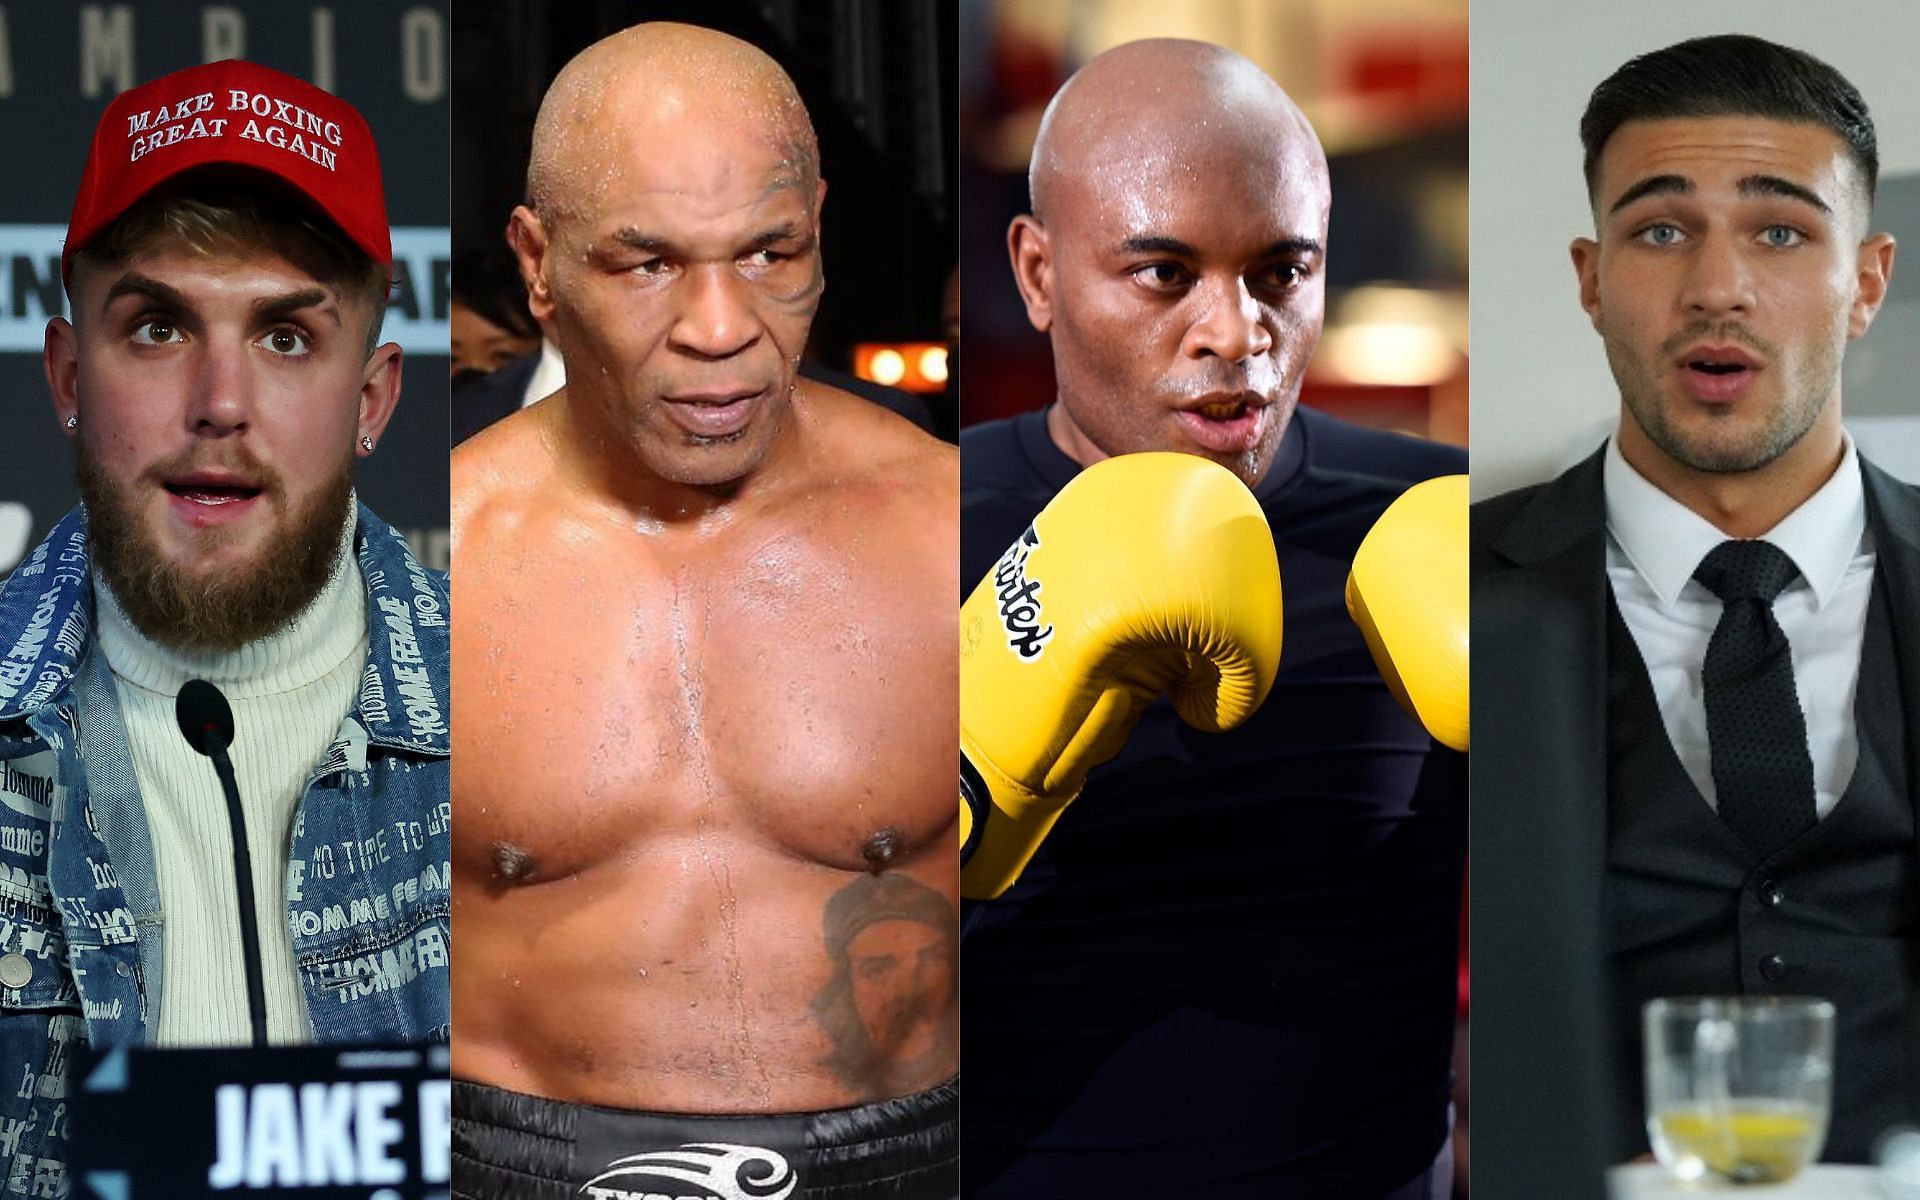 Jake Paul, Mike Tyson, Anderson Silva, and Tommy Fury